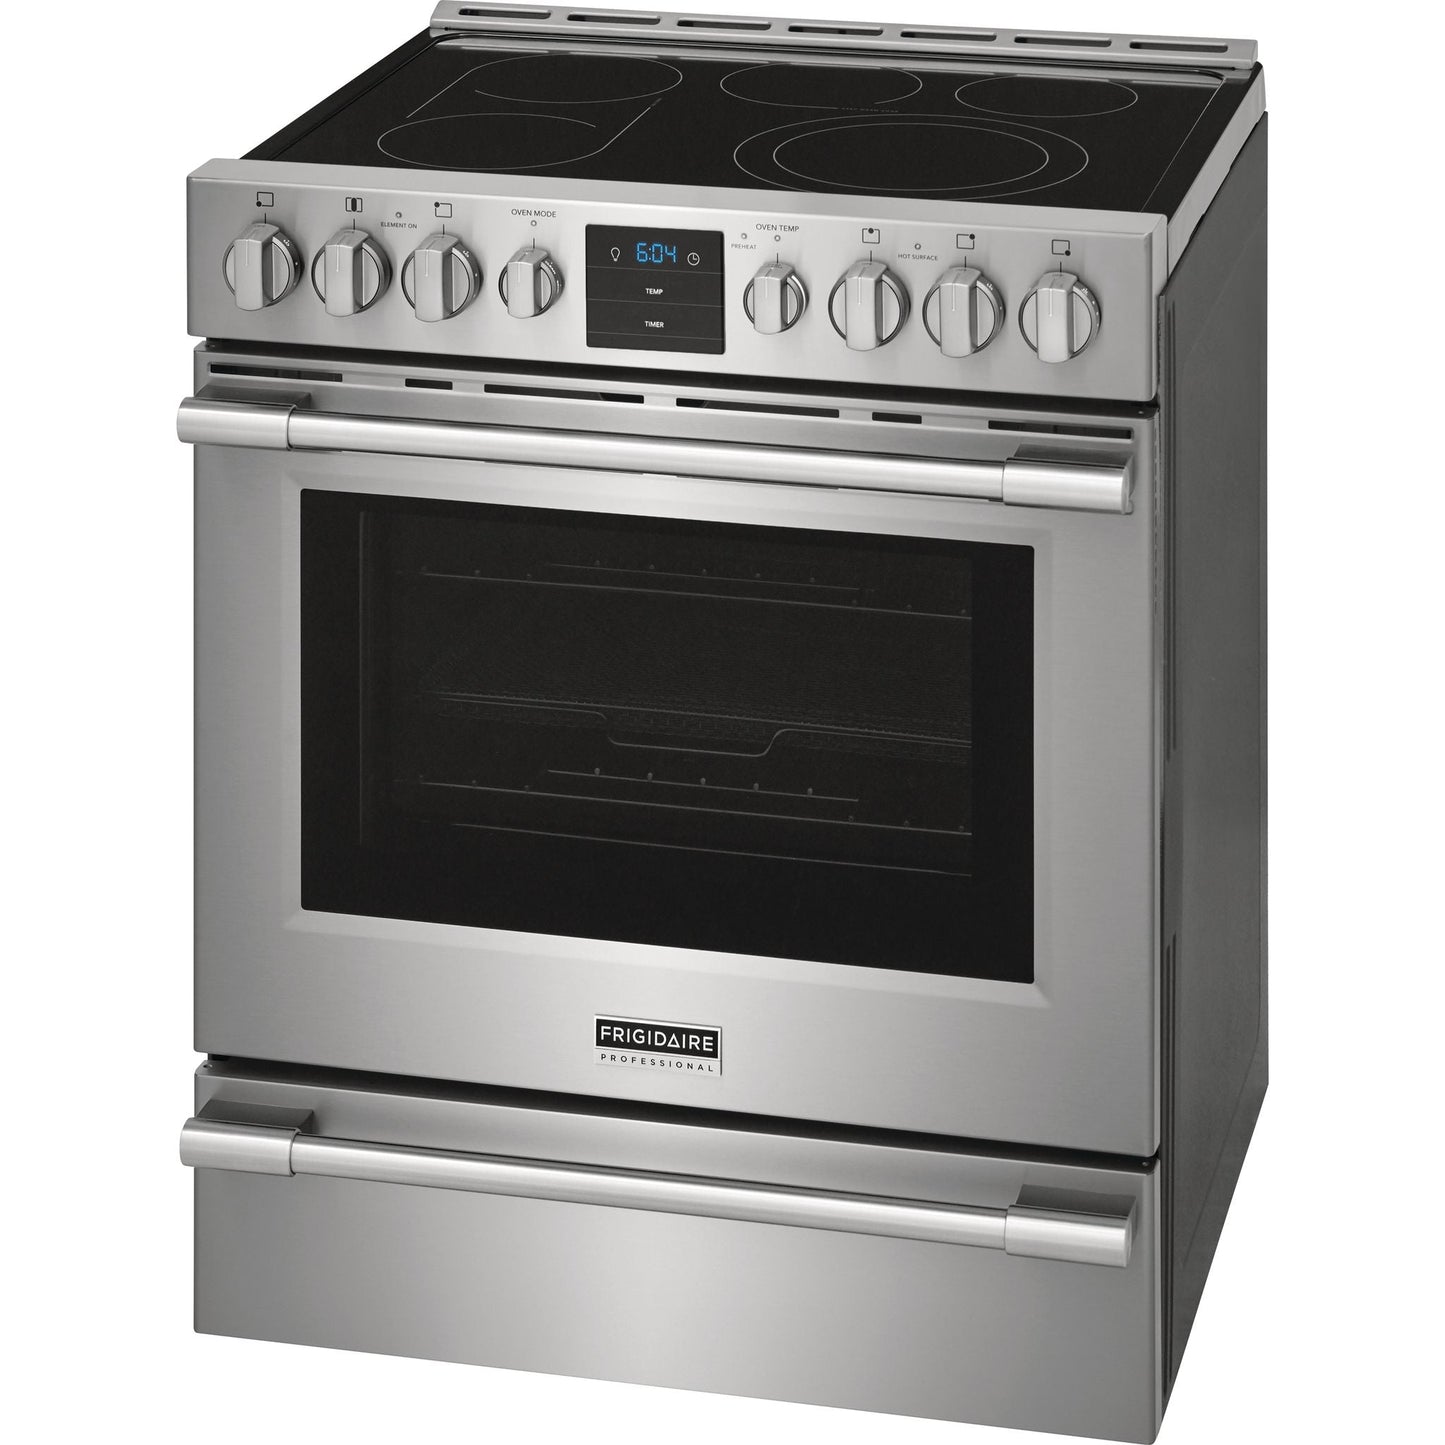 Frigidaire Professional 30" Electric Range (PCFE307CAF) - Stainless Steel